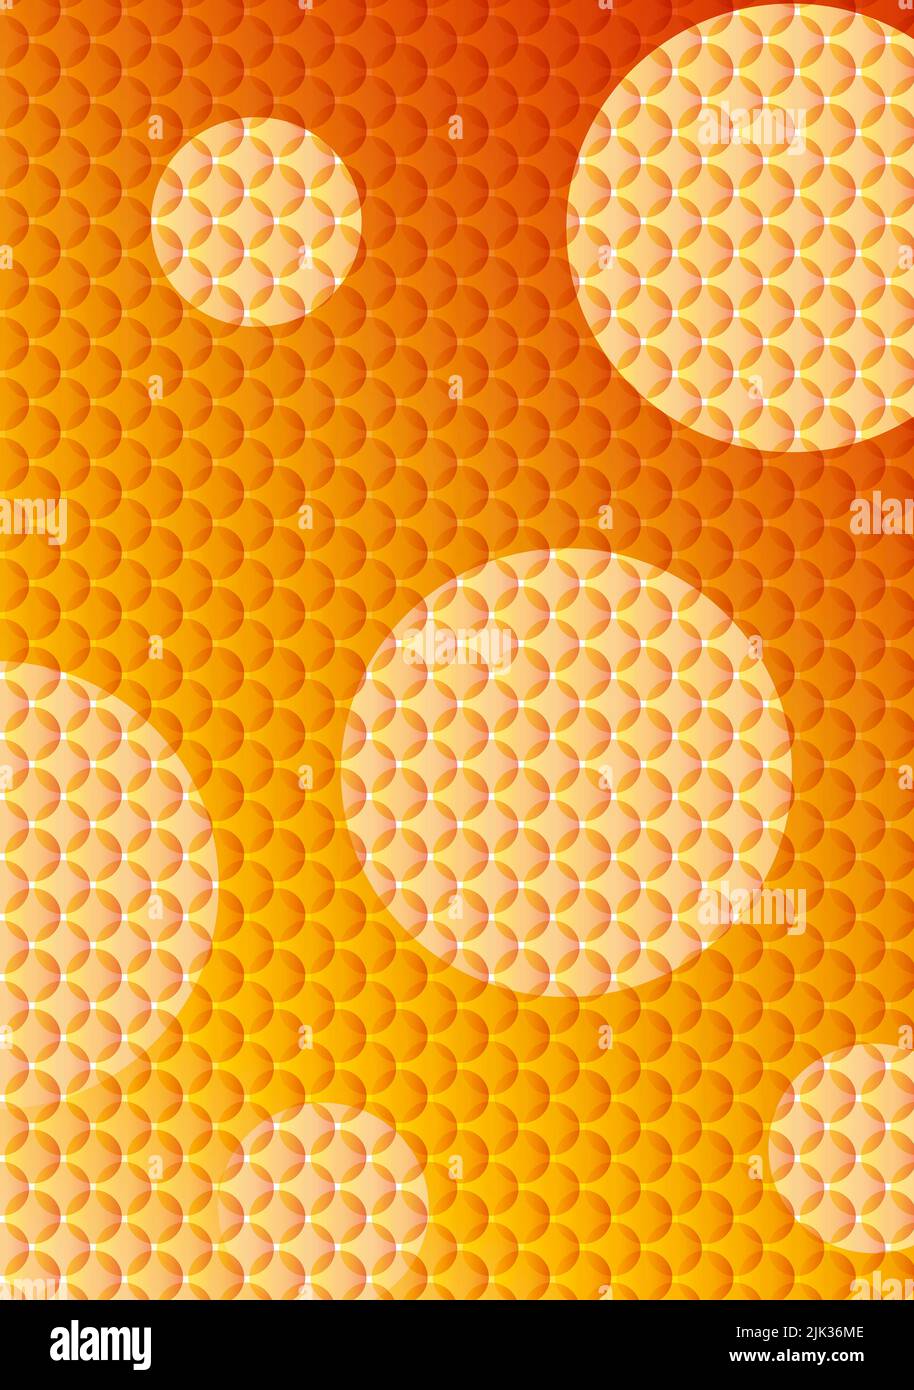 Abstract Geometry pattern orange background for design - stock illustration Stock Photo